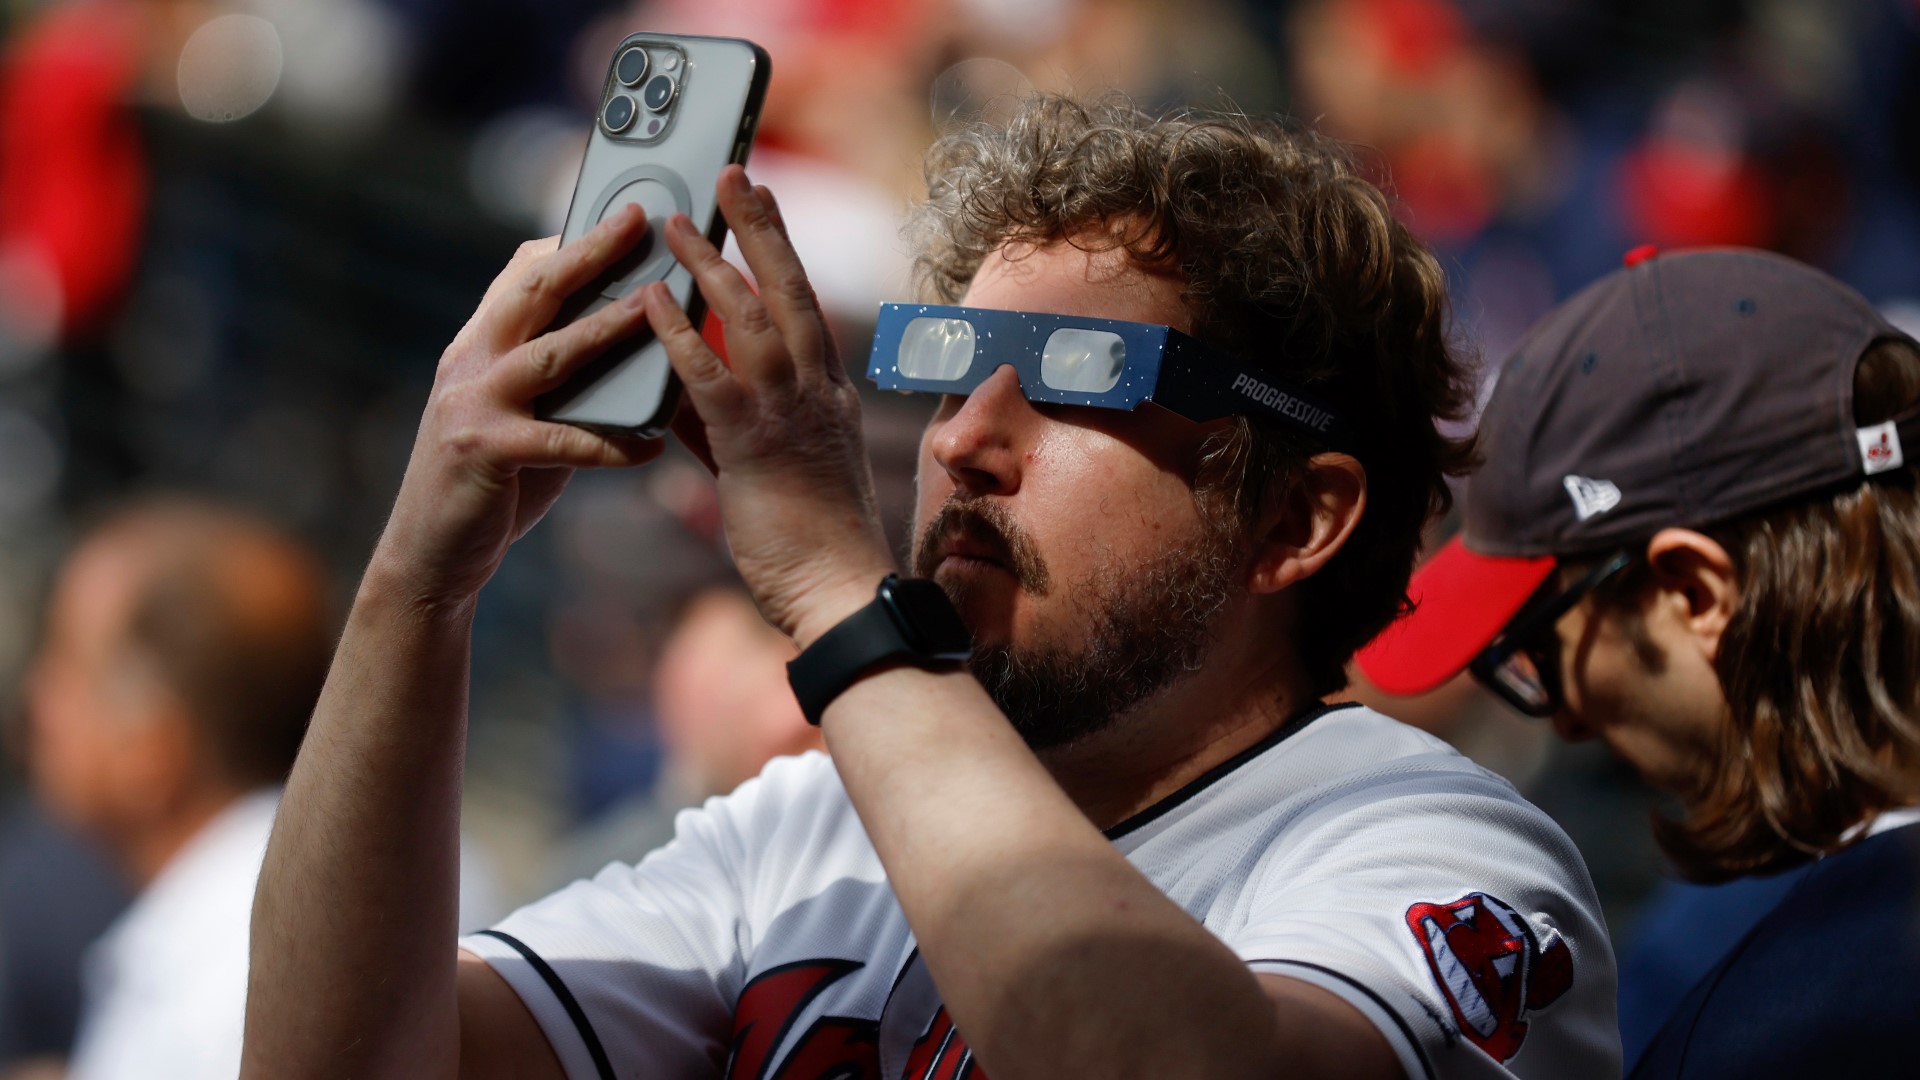 Before Cleveland's home opener, players and fans enjoyed a total solar eclipse.